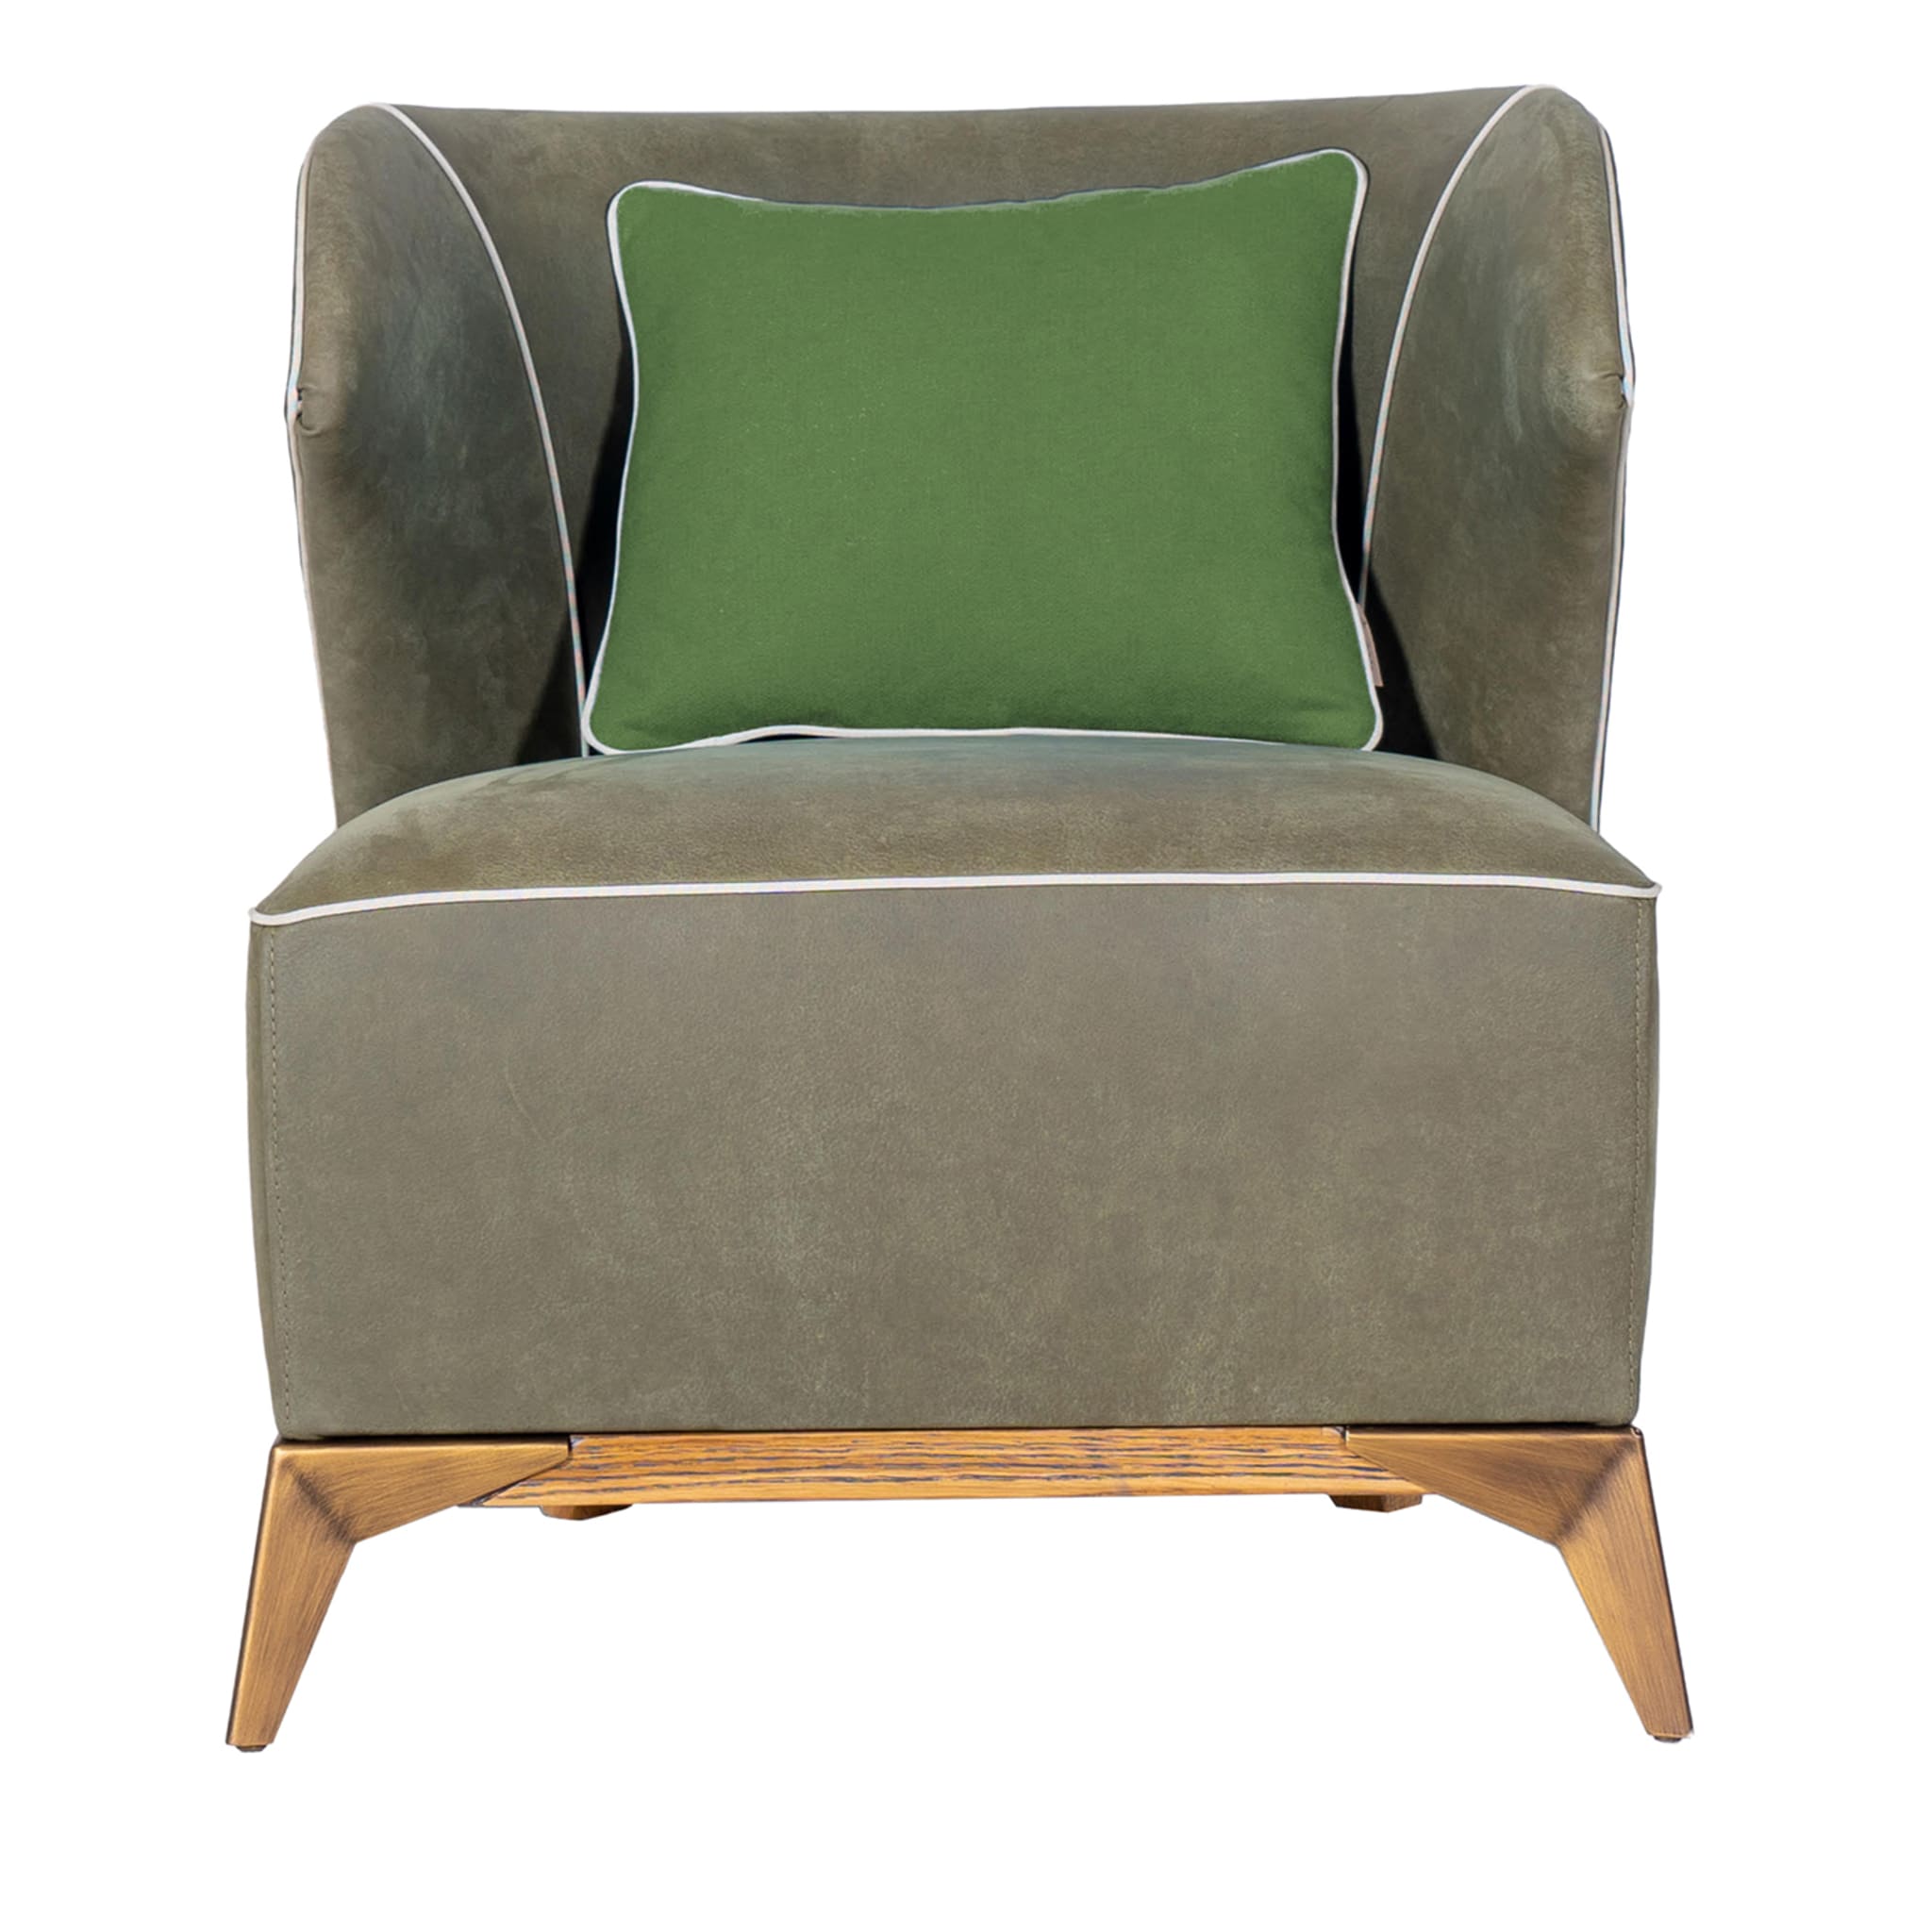 Agostina Green Leather Lounge Chair - Main view